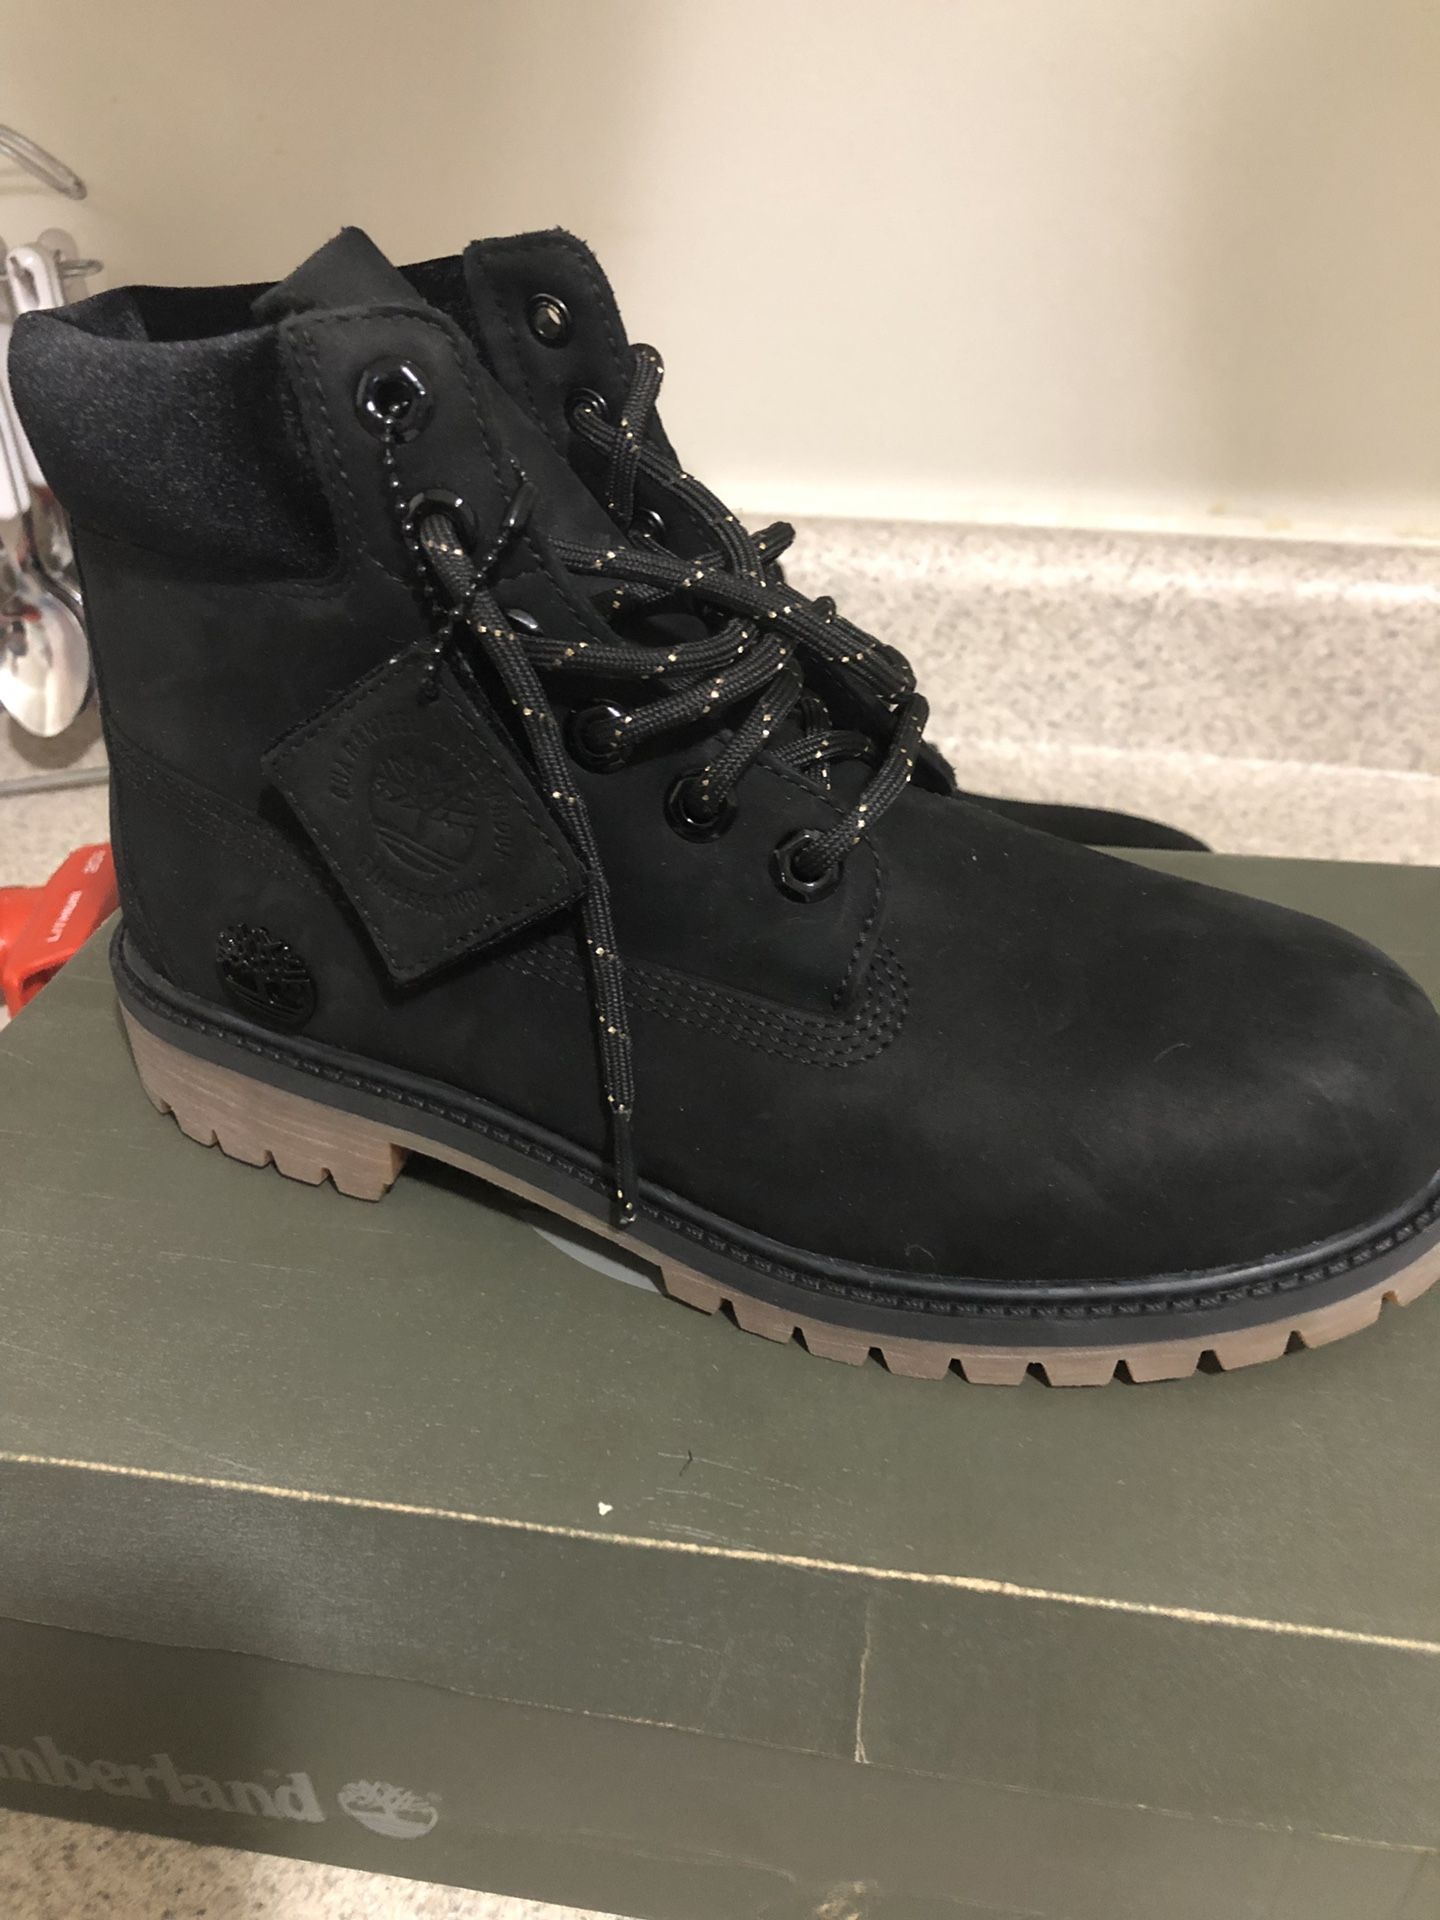 Black timberlands with box!